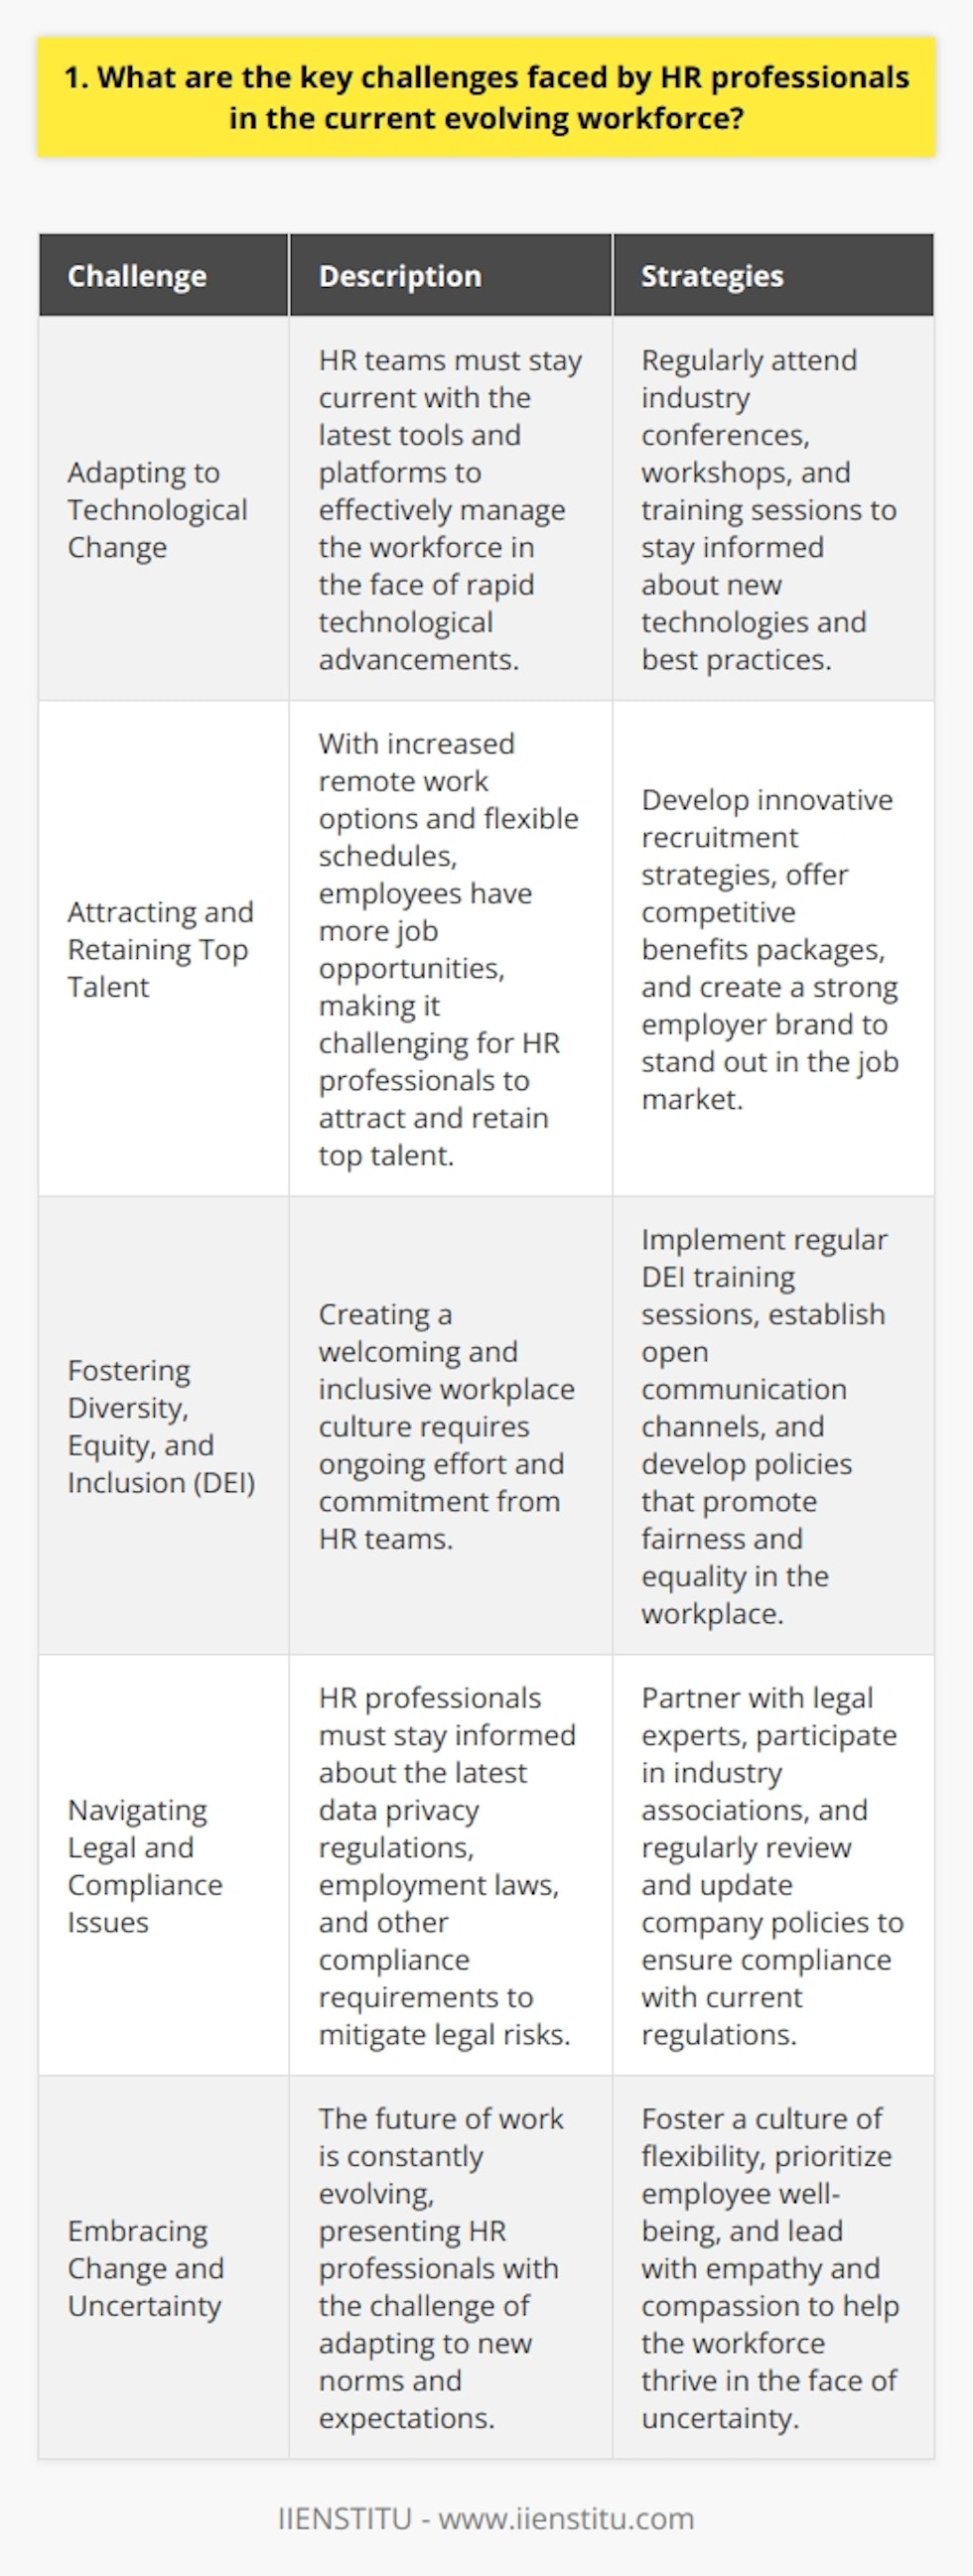 As an HR professional with over a decade of experience, Ive witnessed firsthand the challenges facing our field in the current evolving workforce. One of the most significant issues is adapting to the rapid pace of technological change. HR teams must stay up-to-date with the latest tools and platforms to effectively manage the workforce. Attracting and Retaining Top Talent Another key challenge is attracting and retaining top talent in a highly competitive job market. With the rise of remote work and flexible schedules, employees have more options than ever before. HR professionals must develop innovative strategies to stand out and offer compelling benefits packages. Fostering Diversity, Equity, and Inclusion Fostering diversity, equity, and inclusion (DEI) is also a critical challenge for HR teams. Creating a welcoming and inclusive workplace culture requires ongoing effort and commitment. Ive found that regular training sessions and open communication channels are essential for building a strong DEI foundation. Navigating Complex Legal and Compliance Issues HR professionals must also navigate an increasingly complex web of legal and compliance issues. From data privacy regulations to employment laws, staying compliant requires a deep understanding of the latest requirements. In my experience, partnering with legal experts and staying informed through industry associations has been invaluable. Despite these challenges, I believe that HR professionals have a unique opportunity to shape the future of work. By embracing change, prioritizing employee well-being, and leading with empathy and compassion, we can create workplaces that thrive in the face of uncertainty.